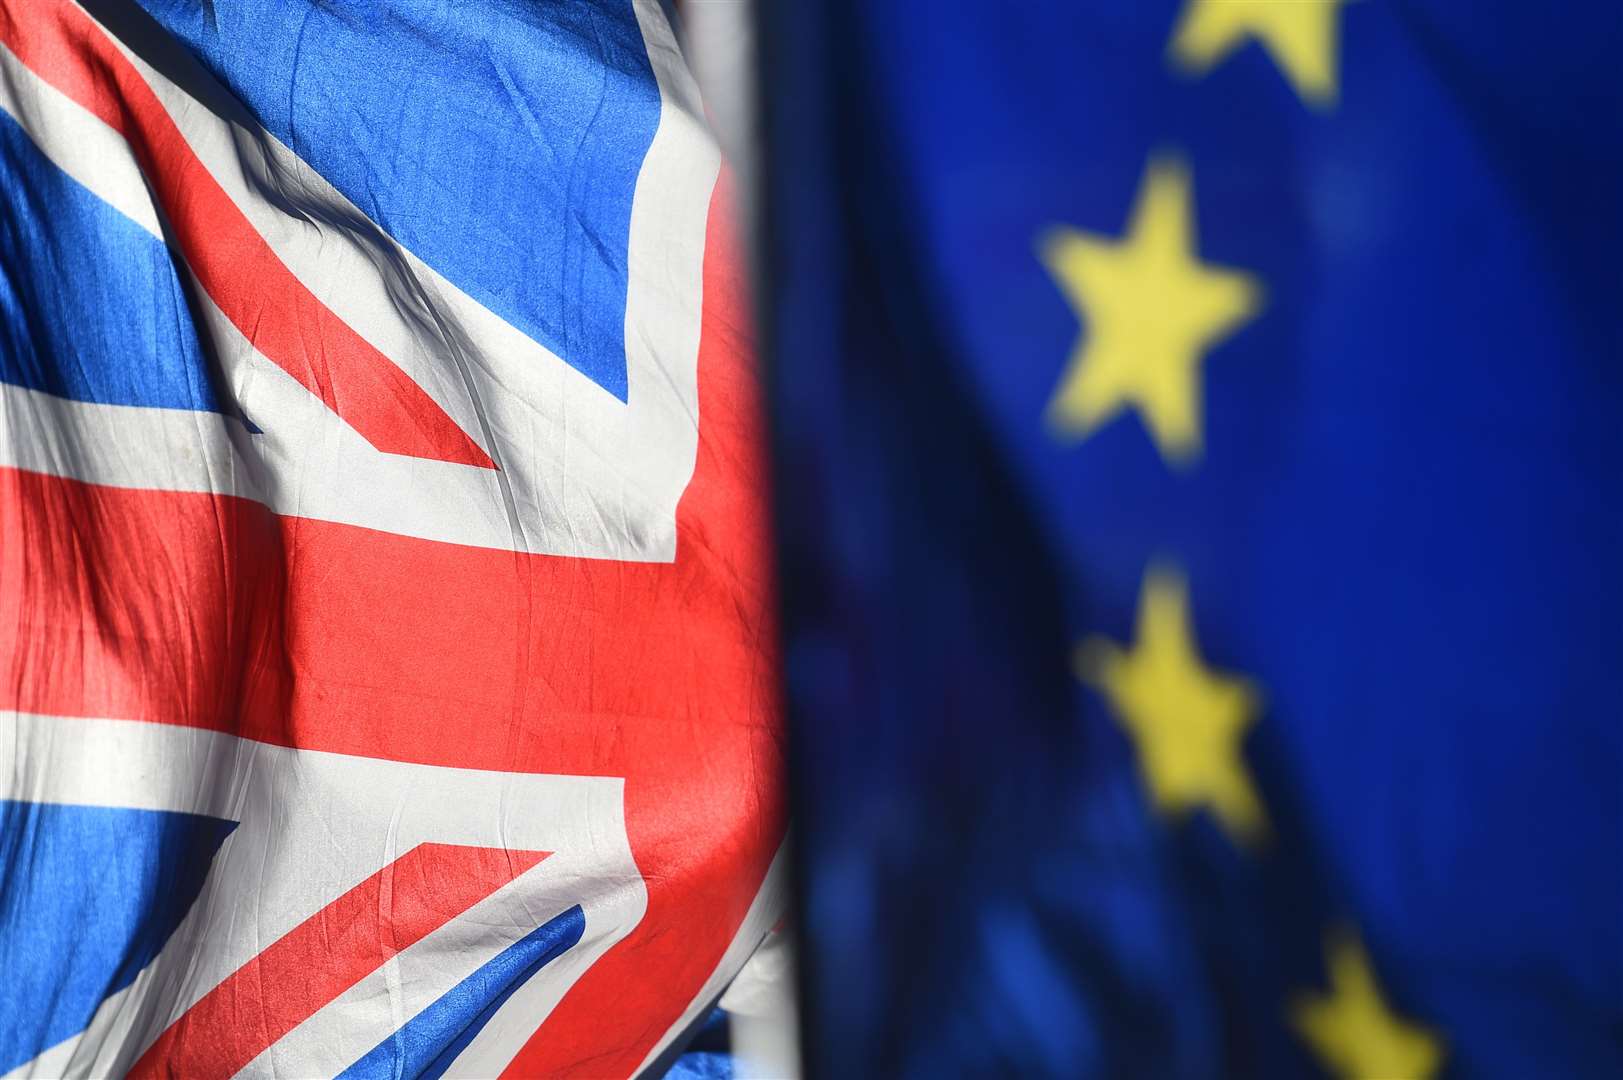 The Brexit transition period ends on December 31